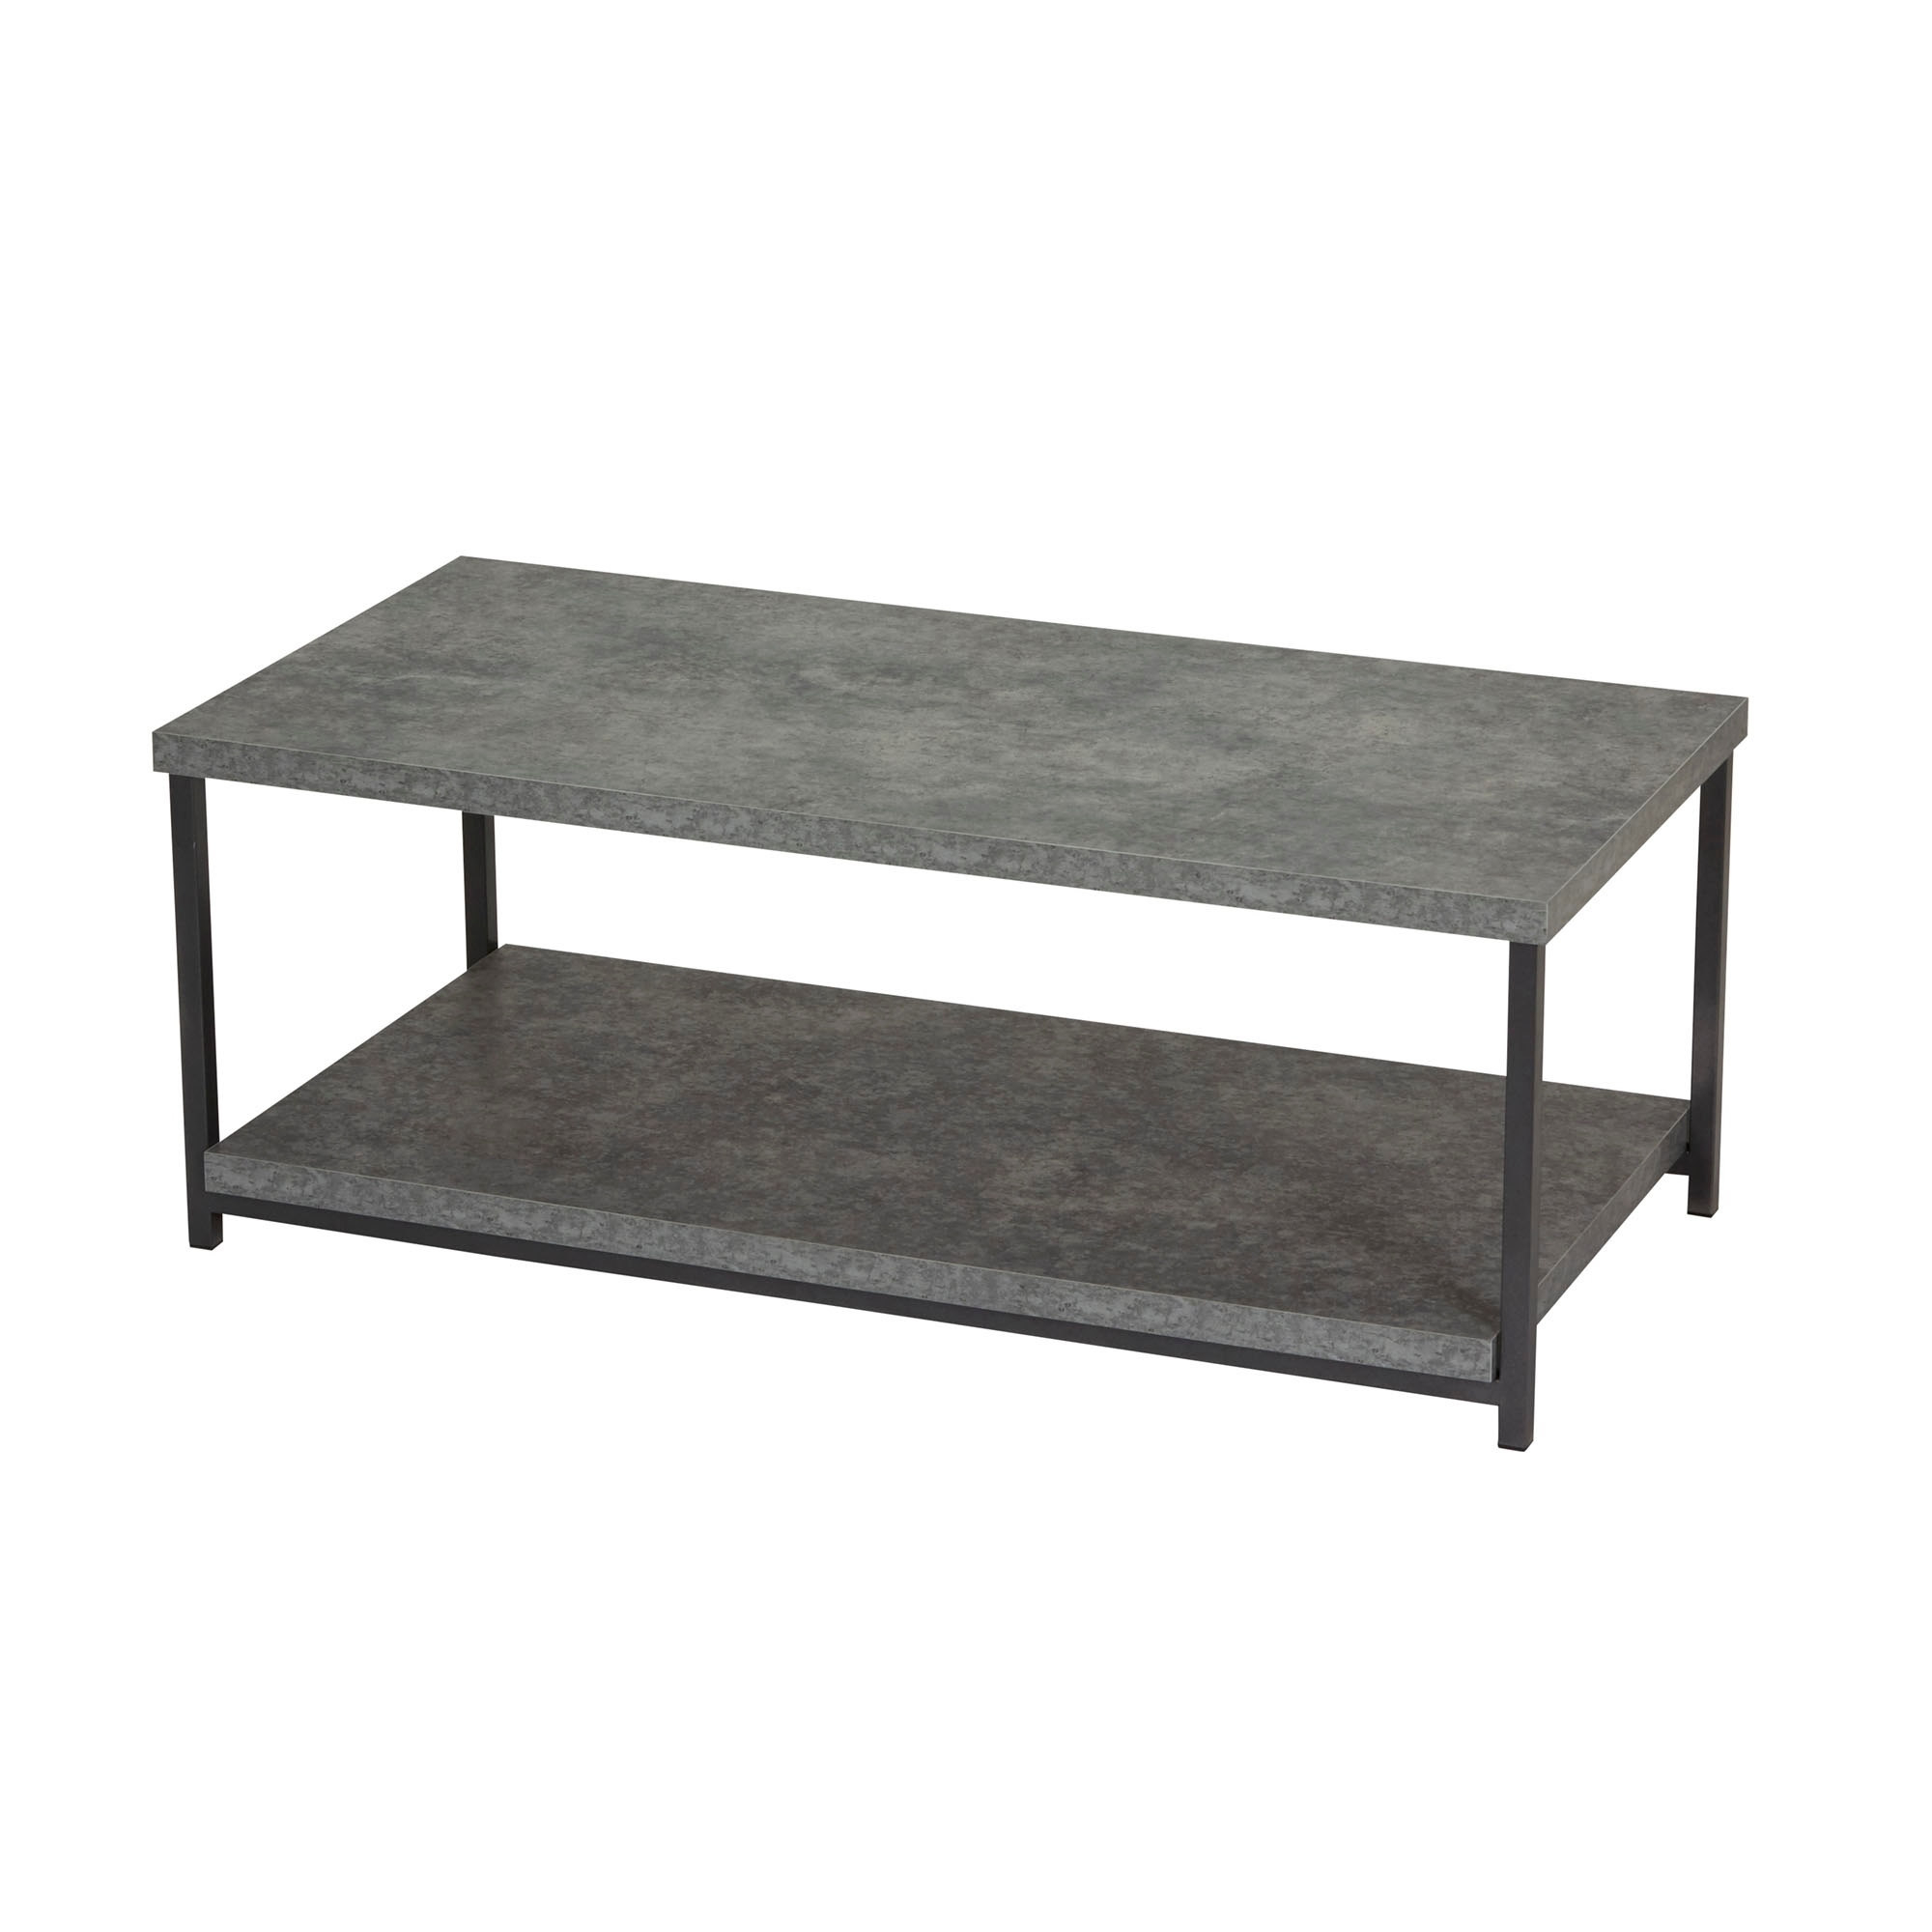 Household Essentials Faux Concrete Slate Coffee Table With Storage Shelf in sizing 2000 X 2000